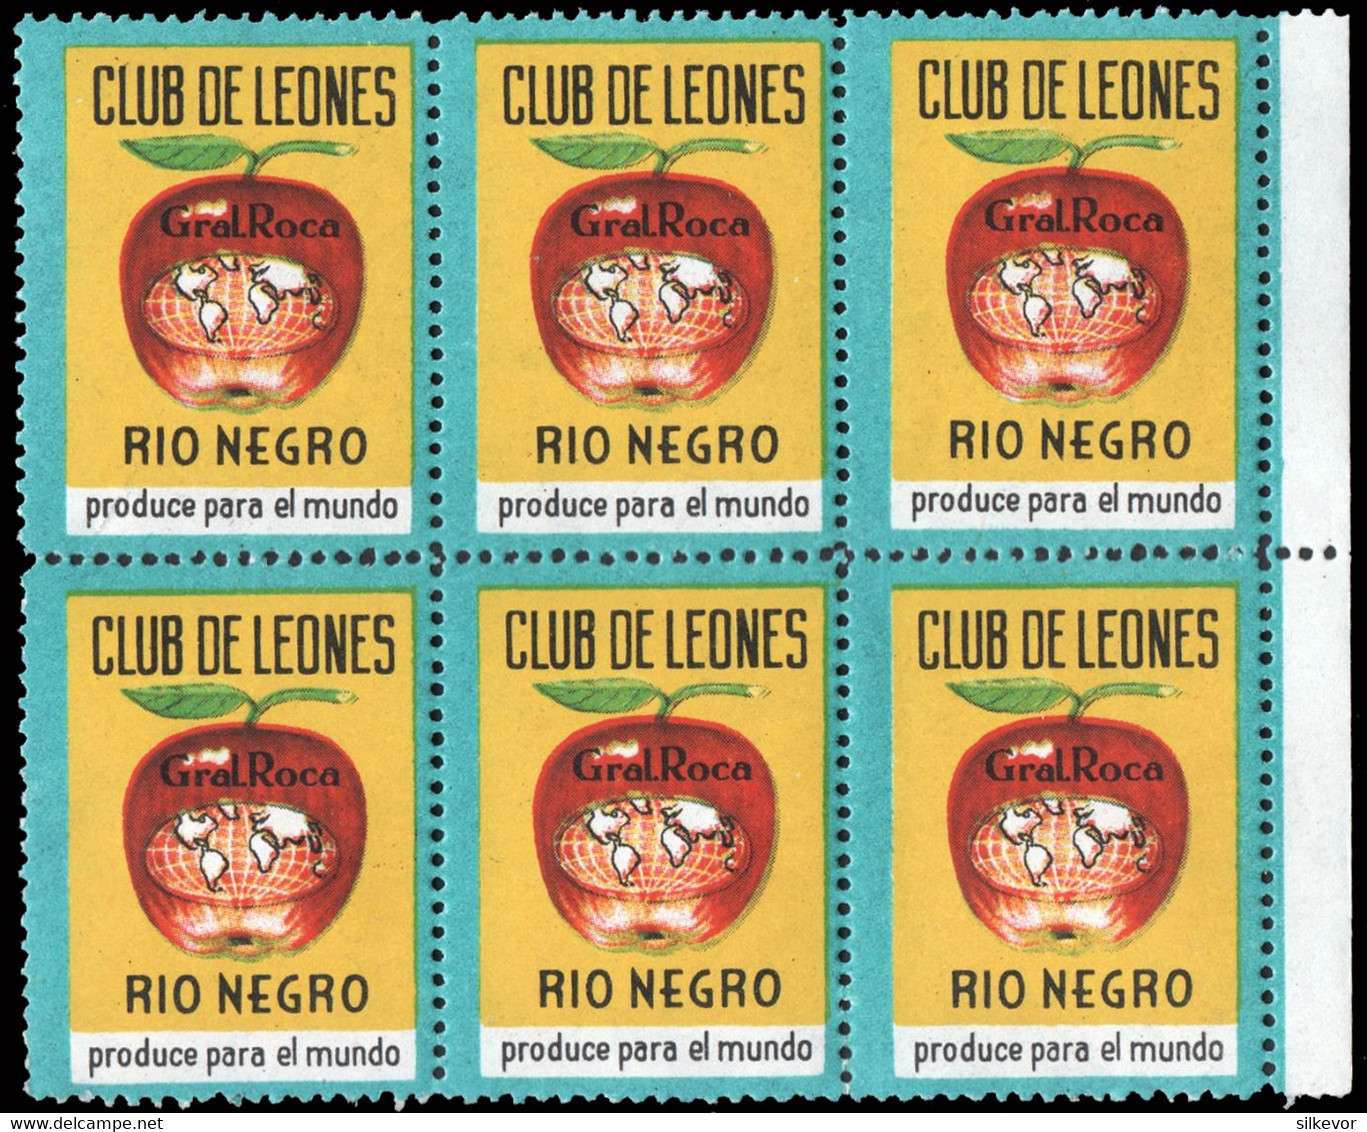 LIONS CLUB-STAMPS-ARGENTINA-CINDERELLA ISSUED IN  1964 BY GENERAL ROCA LIONS CLUB( RIO NEGRO PROVINCE) - Vignettes D'affranchissement (Frama)